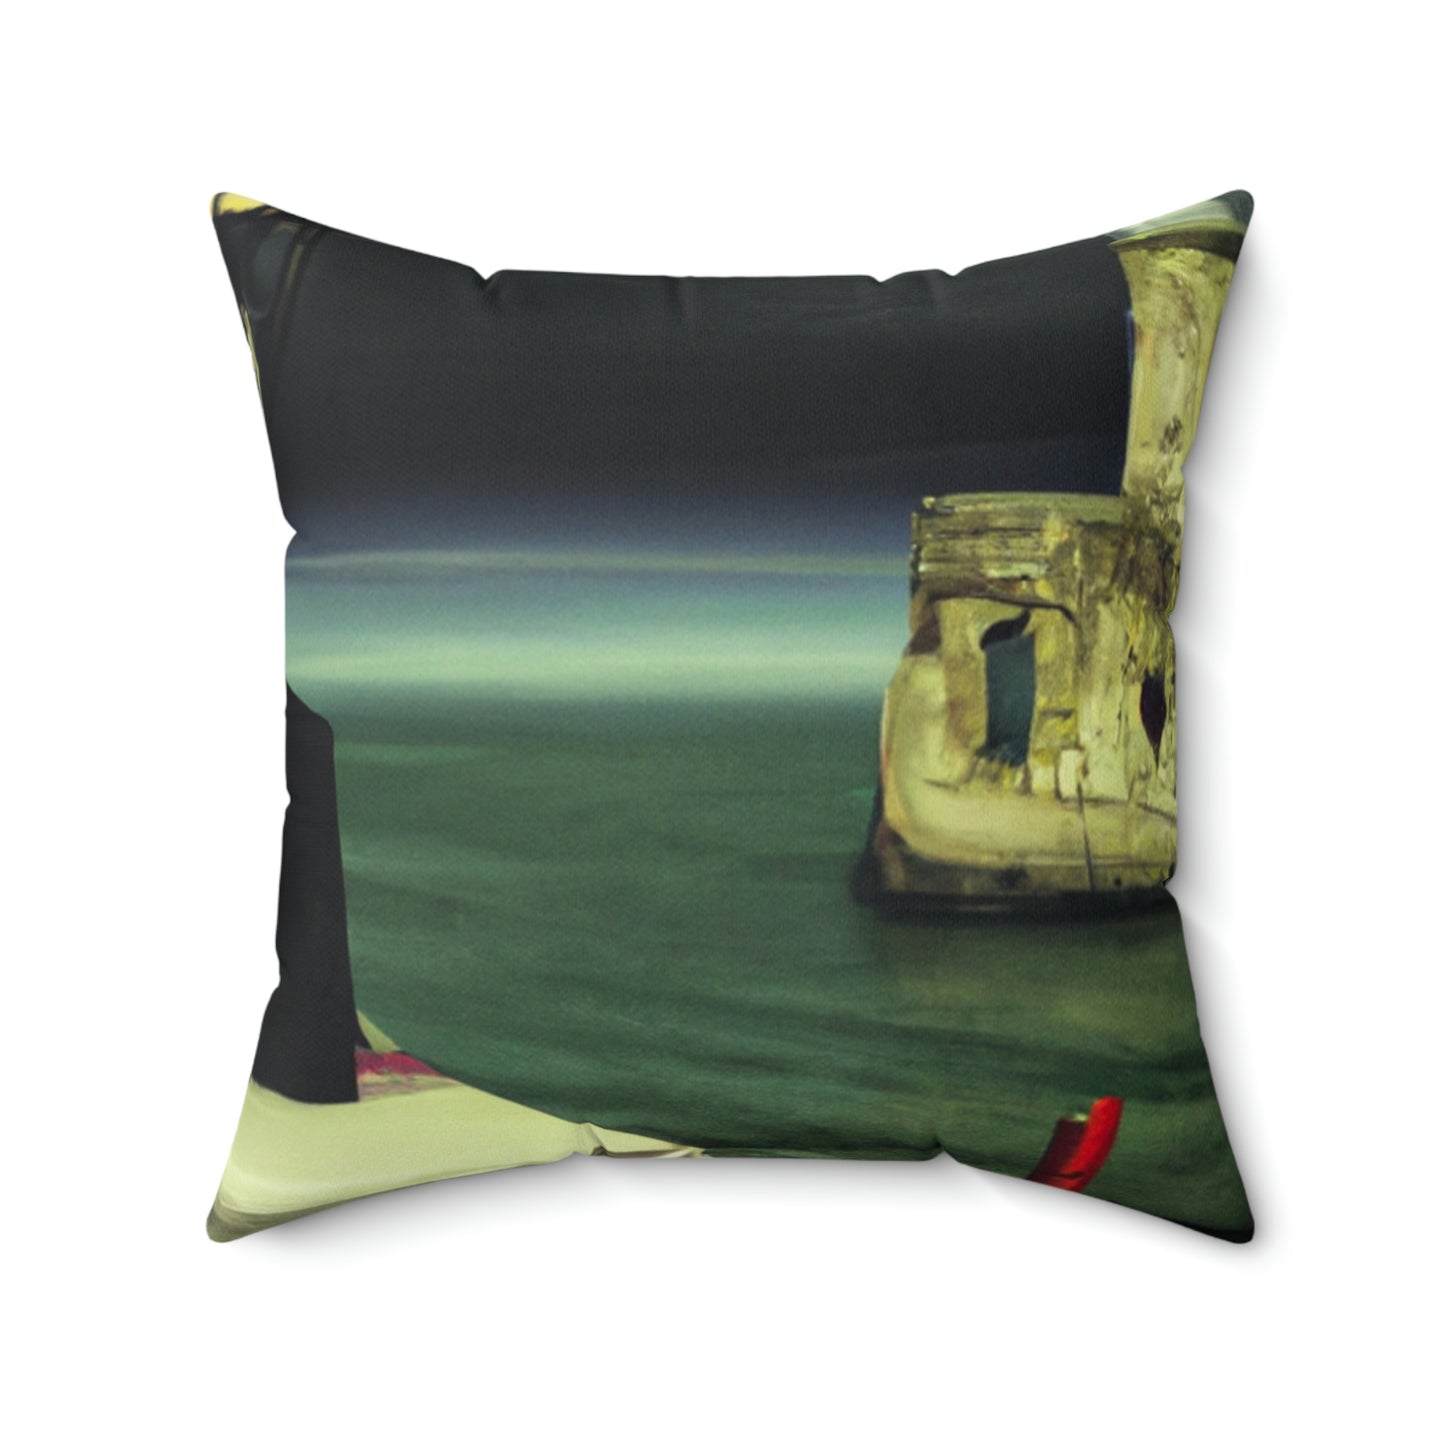 "A Beacon of Romance: An Intimate Candlelit Dinner in a Forgotten Lighthouse" - The Alien Square Pillow